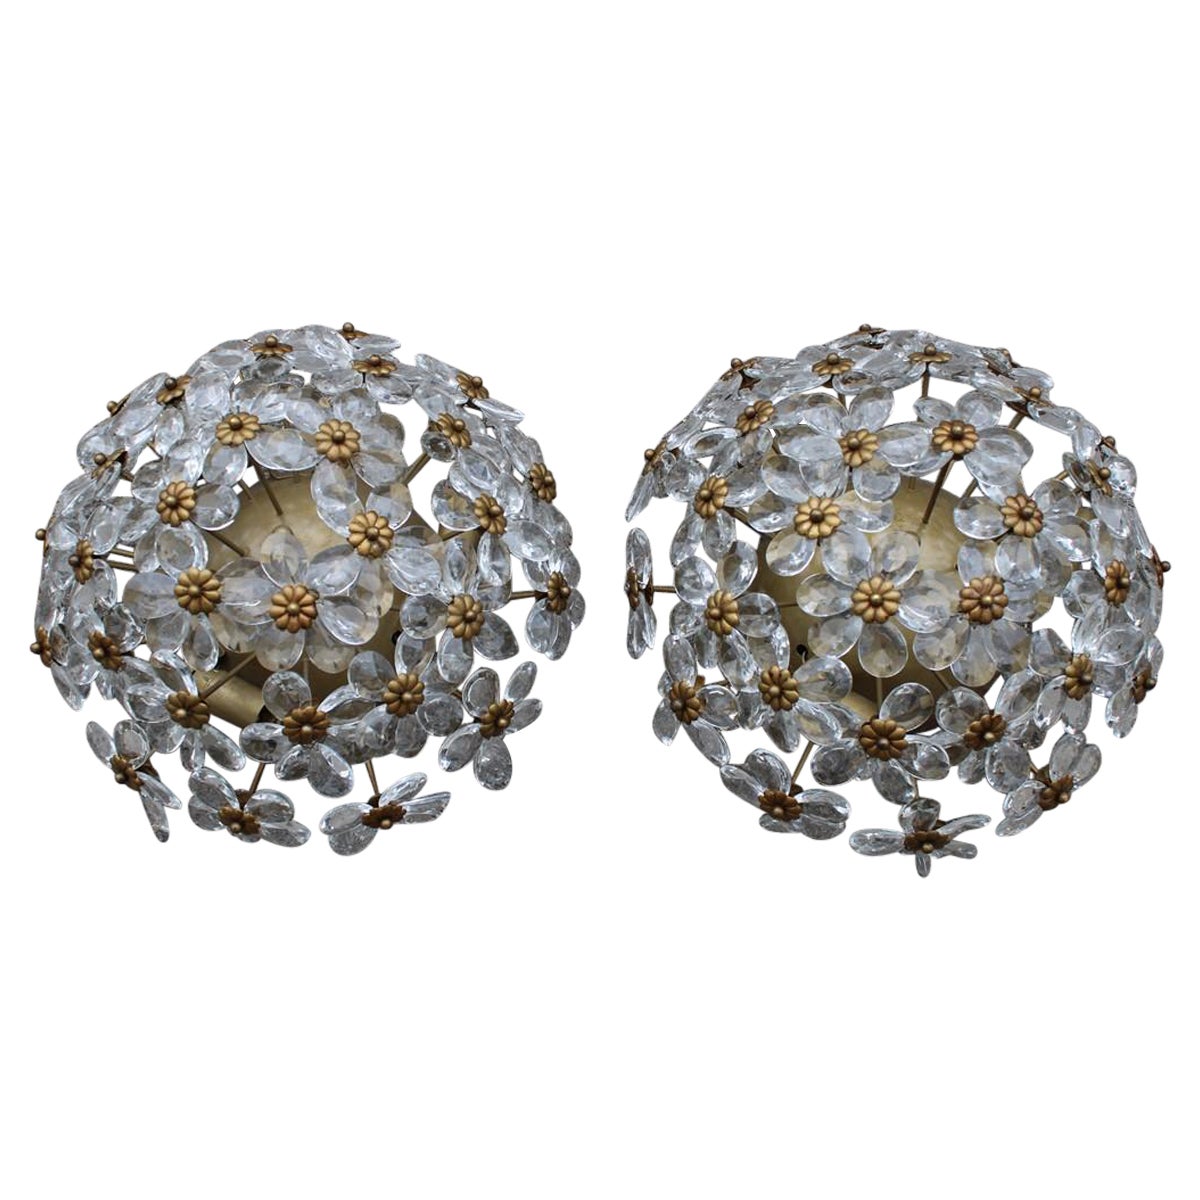 Round Pair of Bouque of Flowers in Crystal and Metal French Design, 1950s For Sale